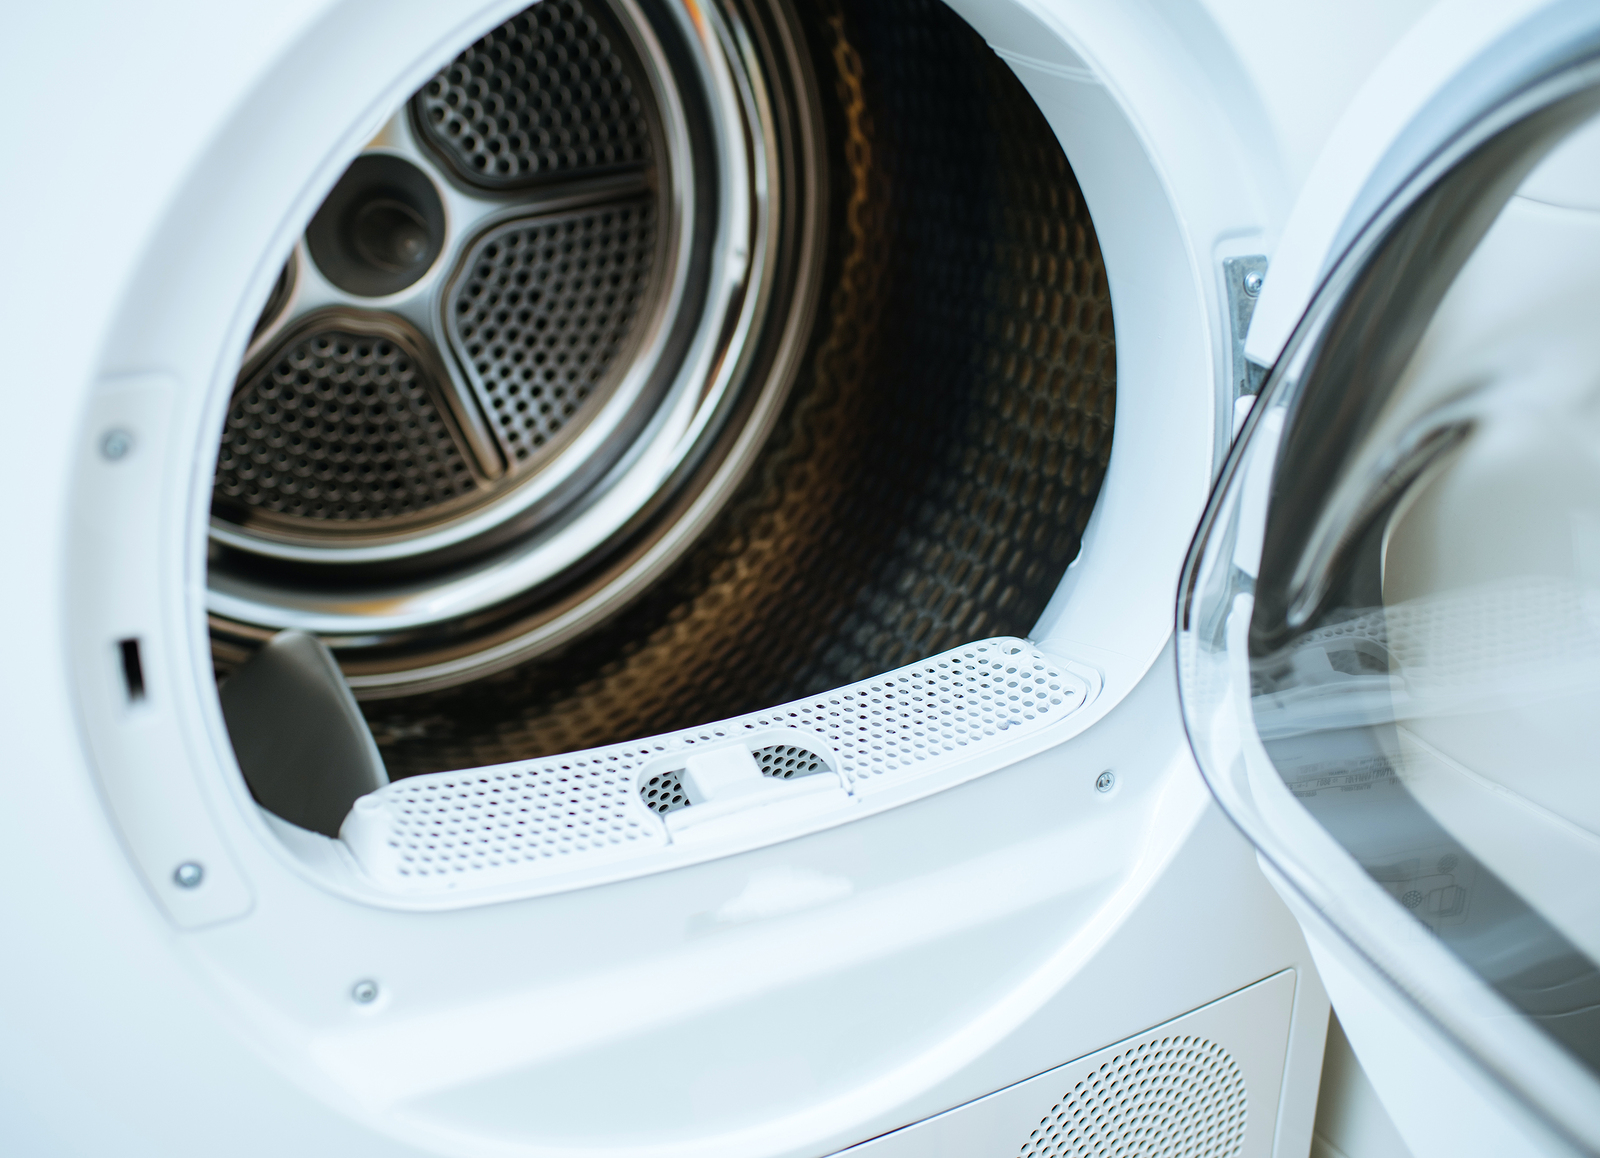 How To Open A Dryer The Do's and Don'ts of Washer and Dryer Maintenance